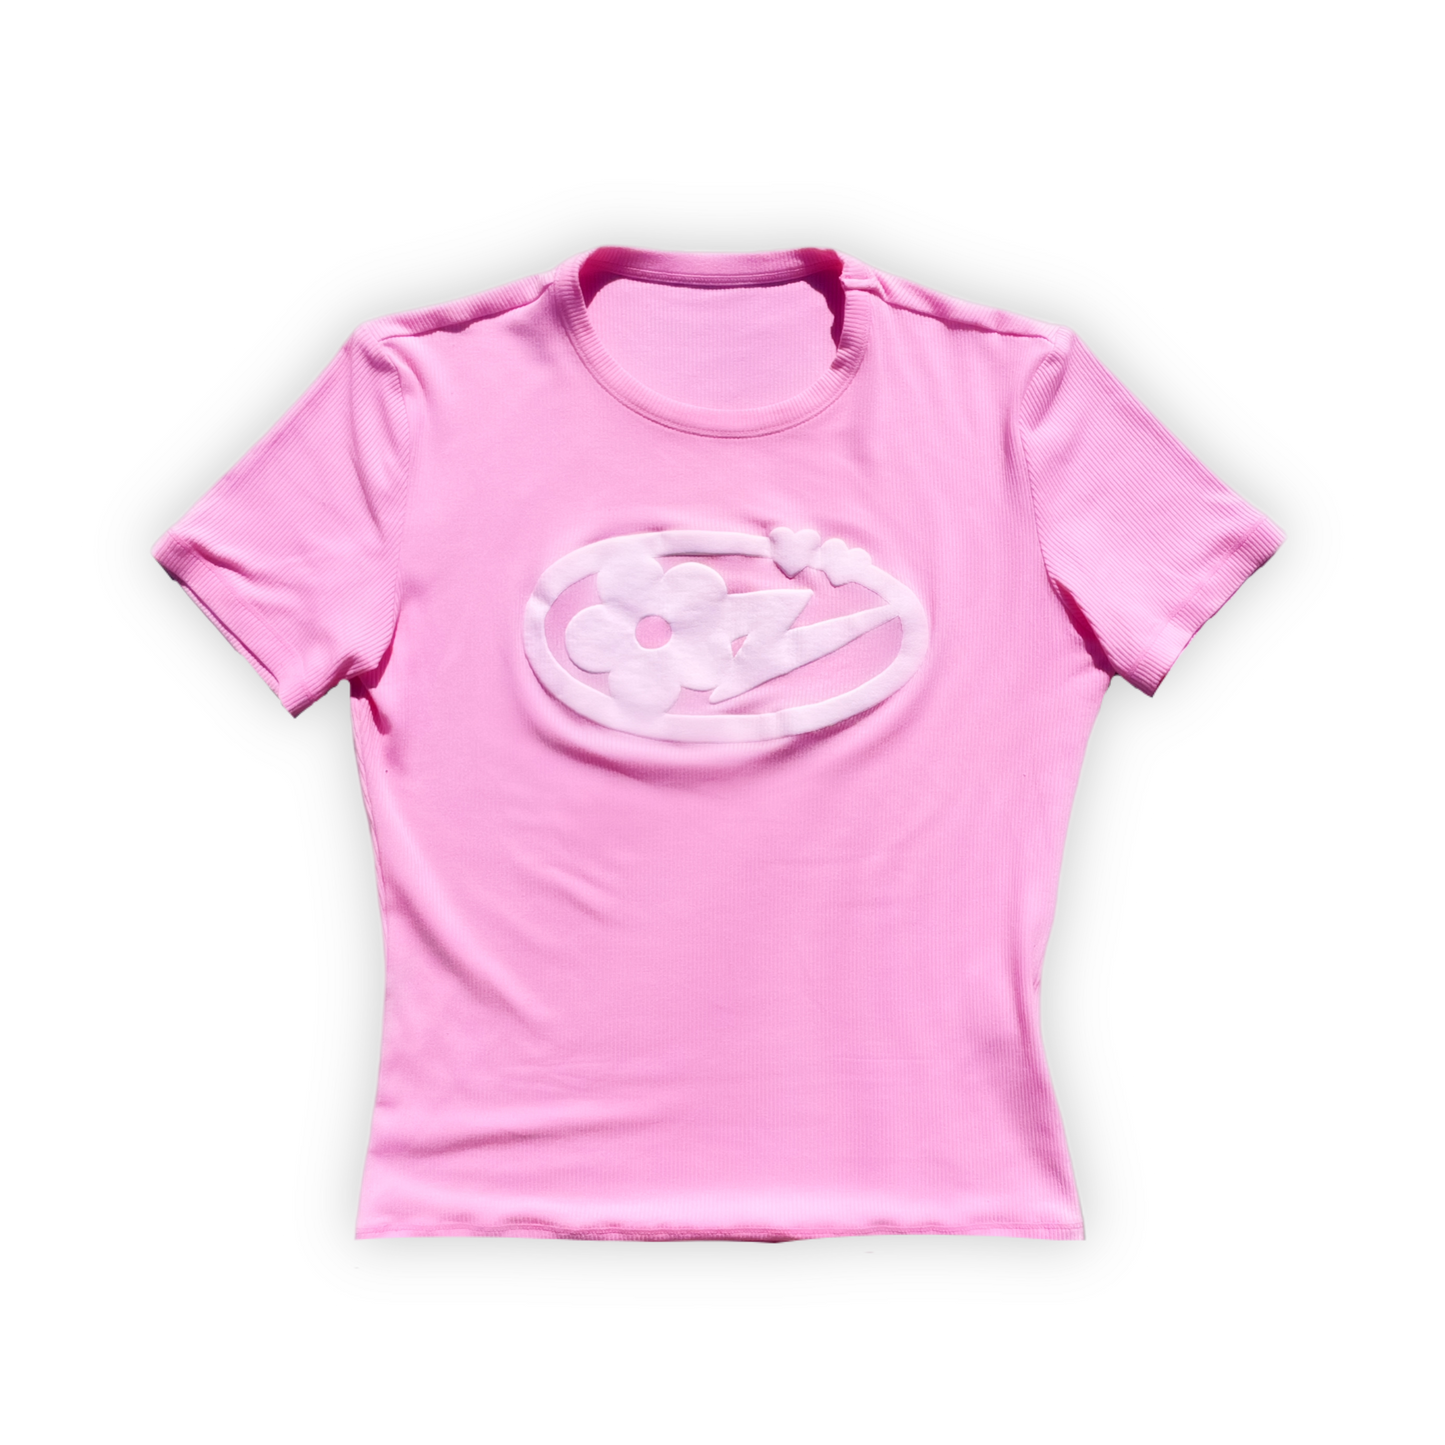 ‘PINK’ Baby Tee